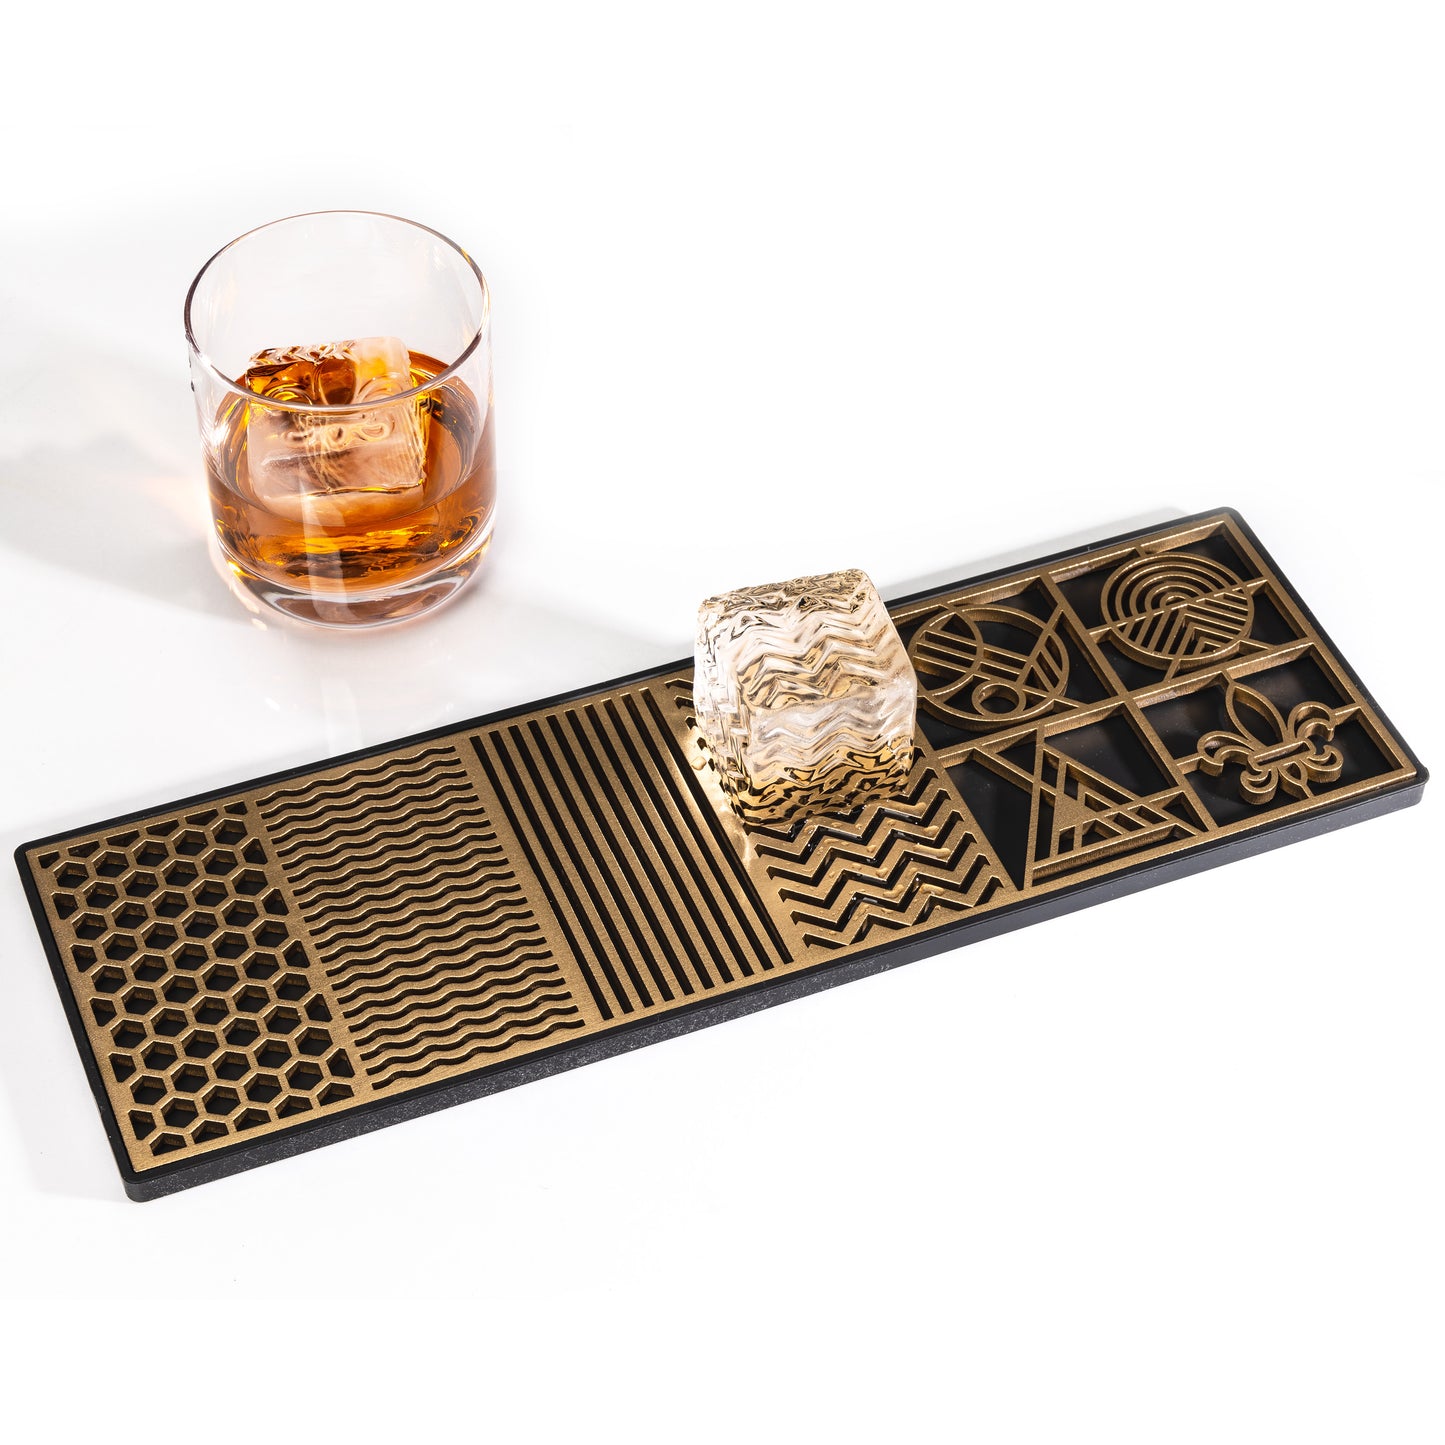 The Ice Designer Plate Elevate Your Cocktail Experience The Ice Designer Plate